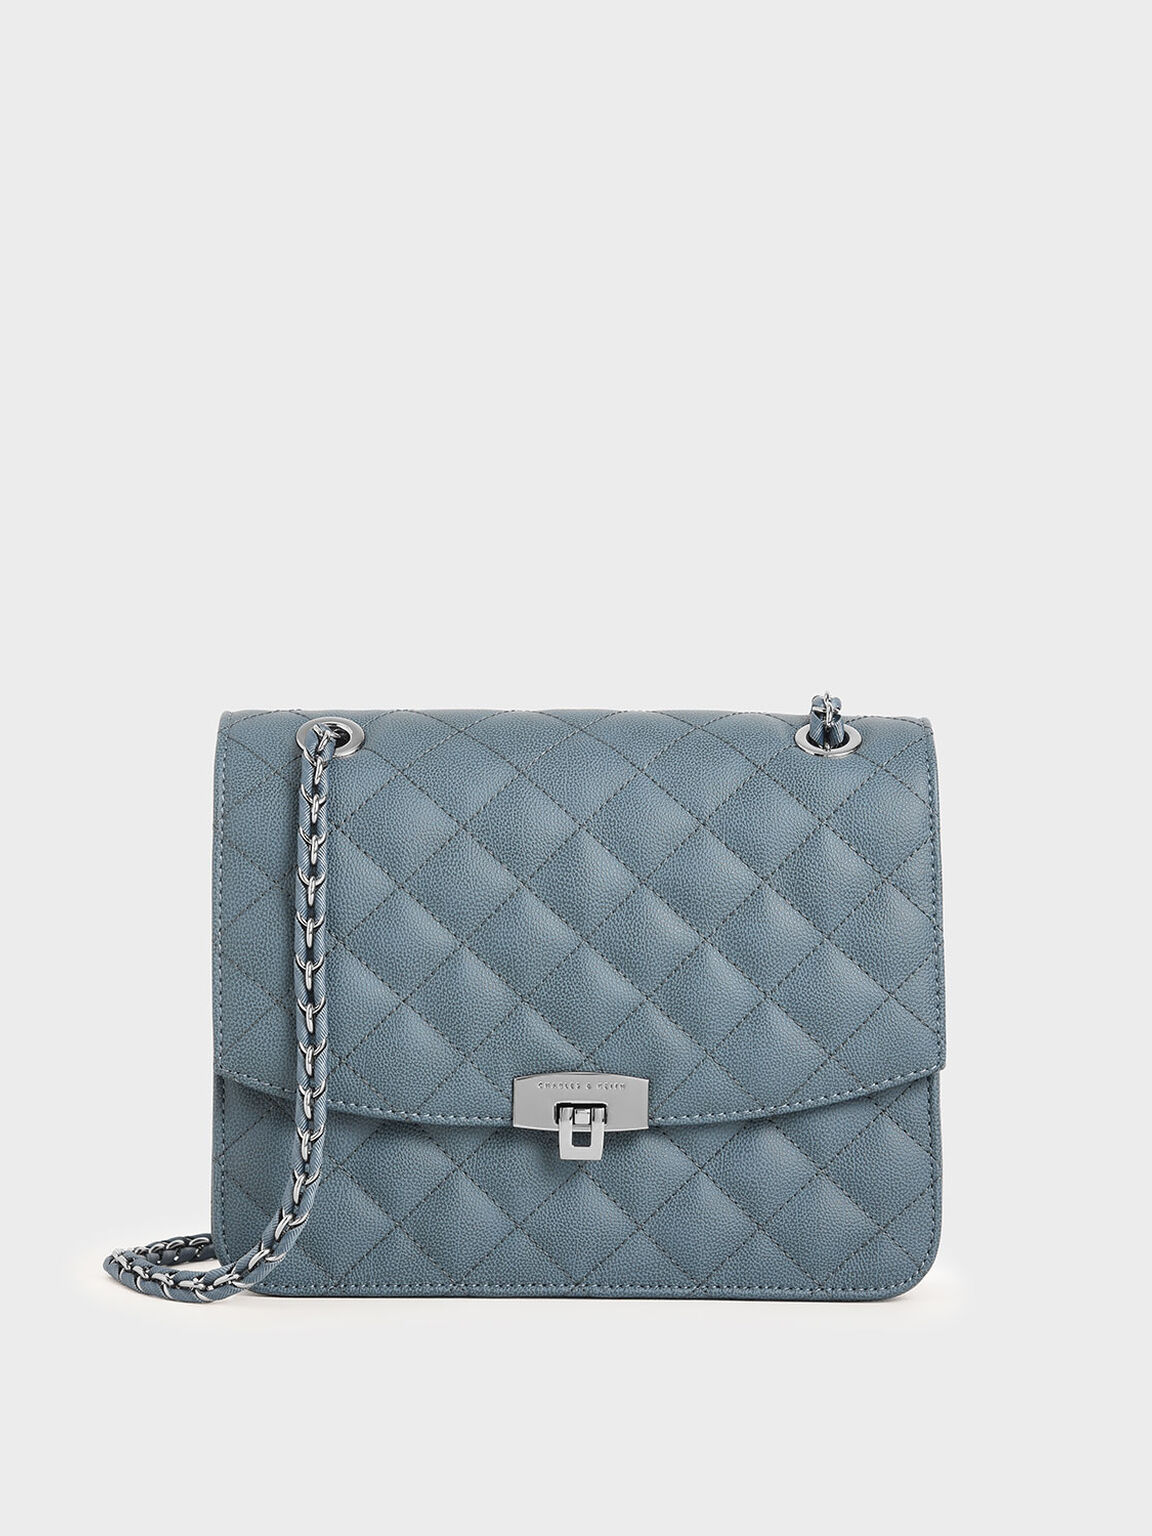 Quilted Chain Strap Bag, Blue, hi-res